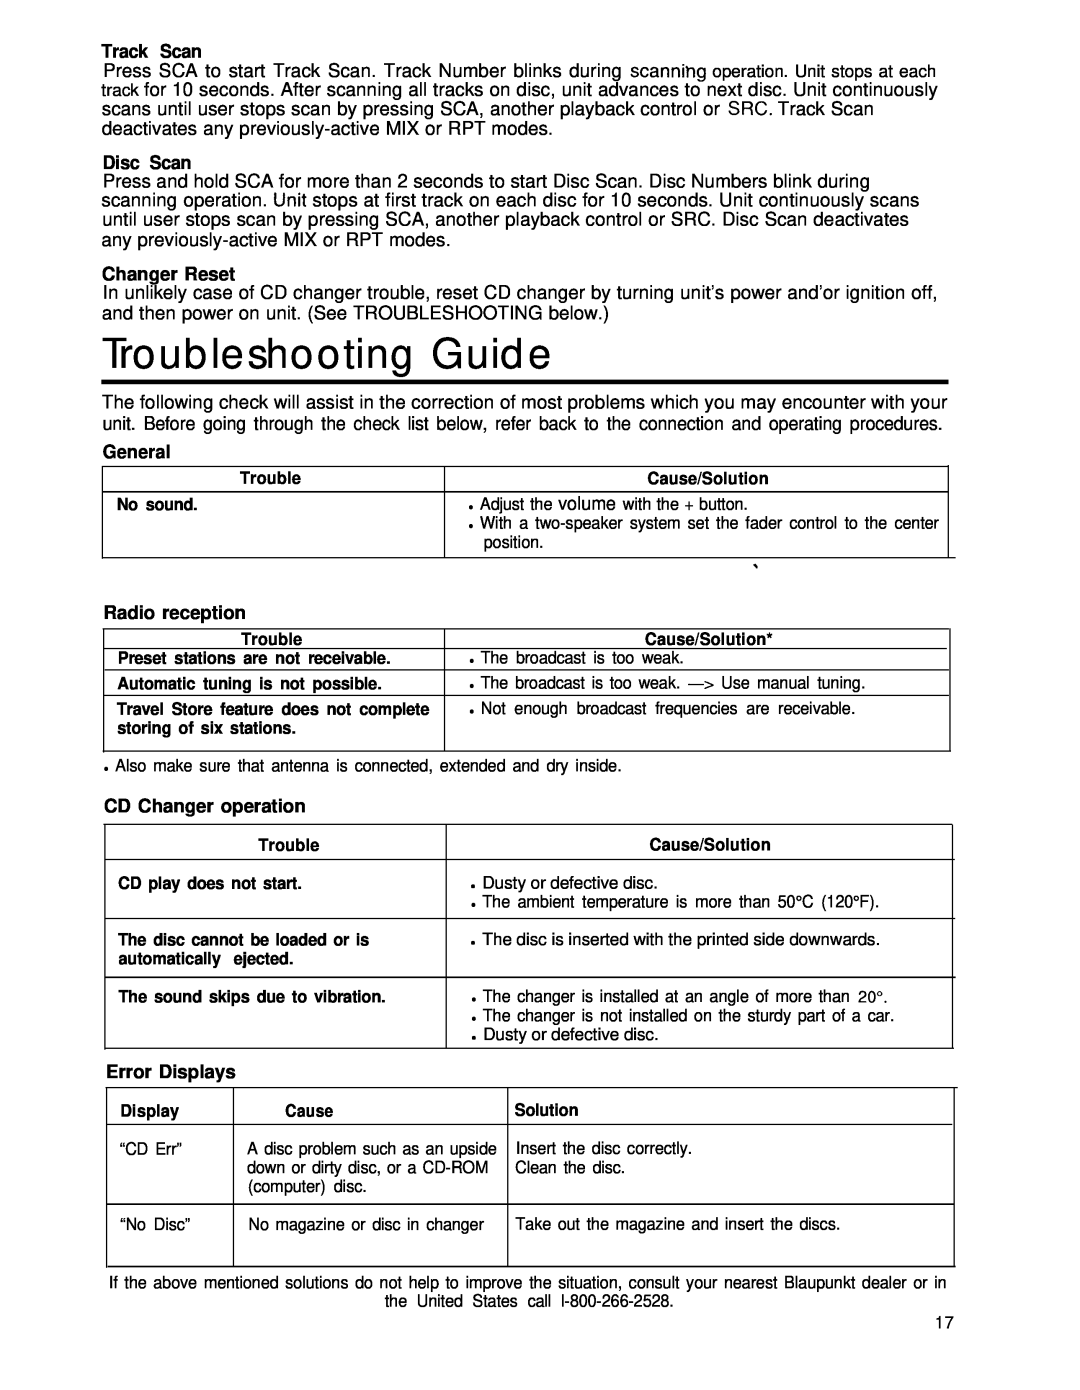 Blaupunkt CR67 Troubleshooting Guide, Track Scan, Disc Scan, Changer Reset, General, Radio reception, CD Changer operation 